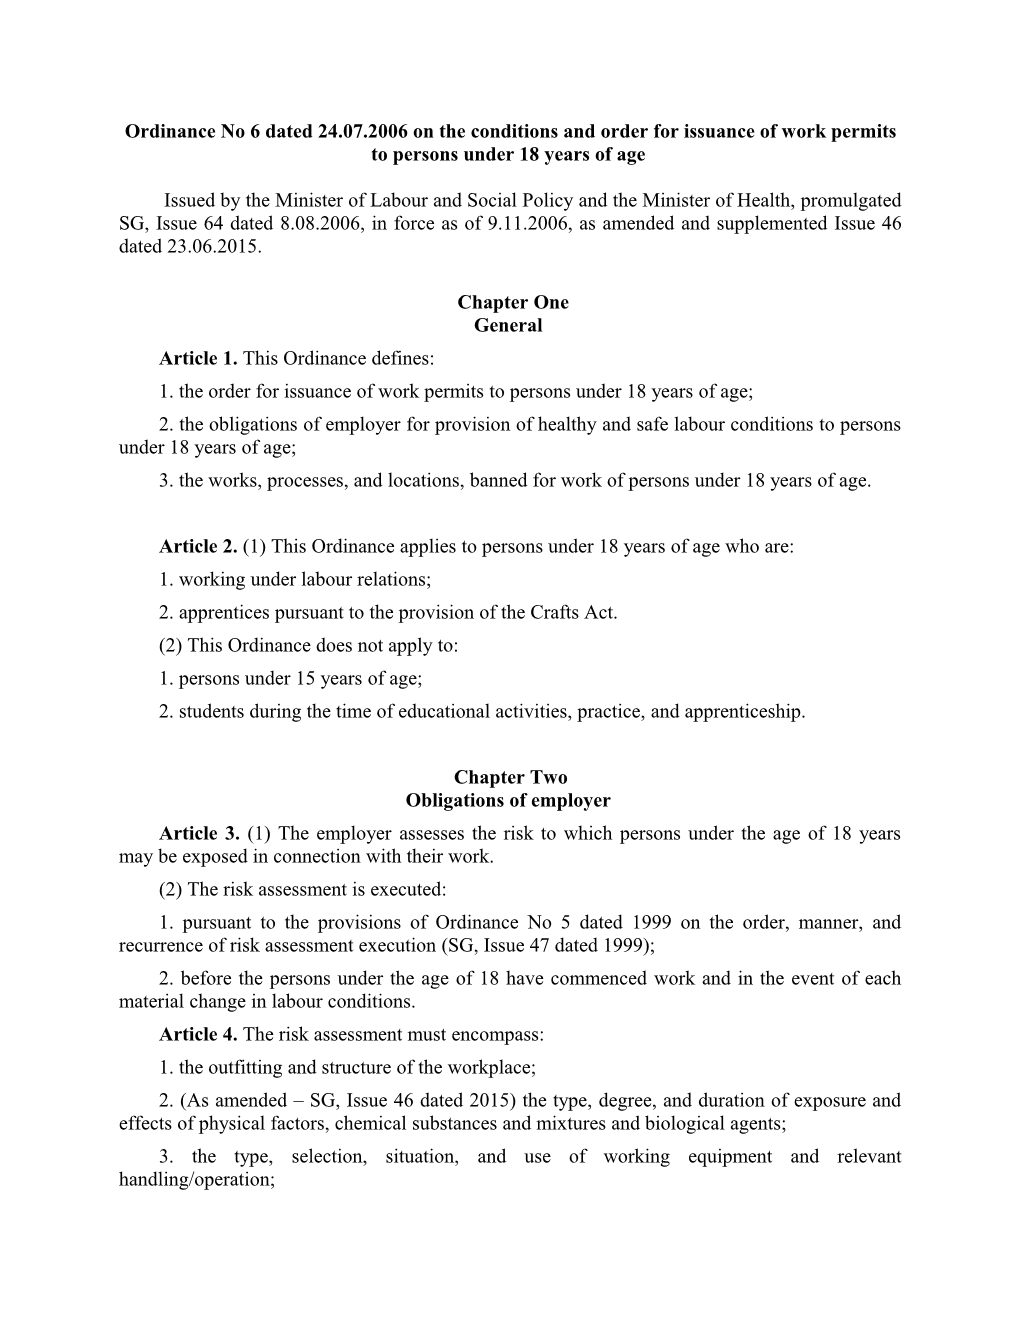 Ordinance No 6 Dated 24.07.2006 on the Conditions and Orderfor Issuance Ofwork Permits